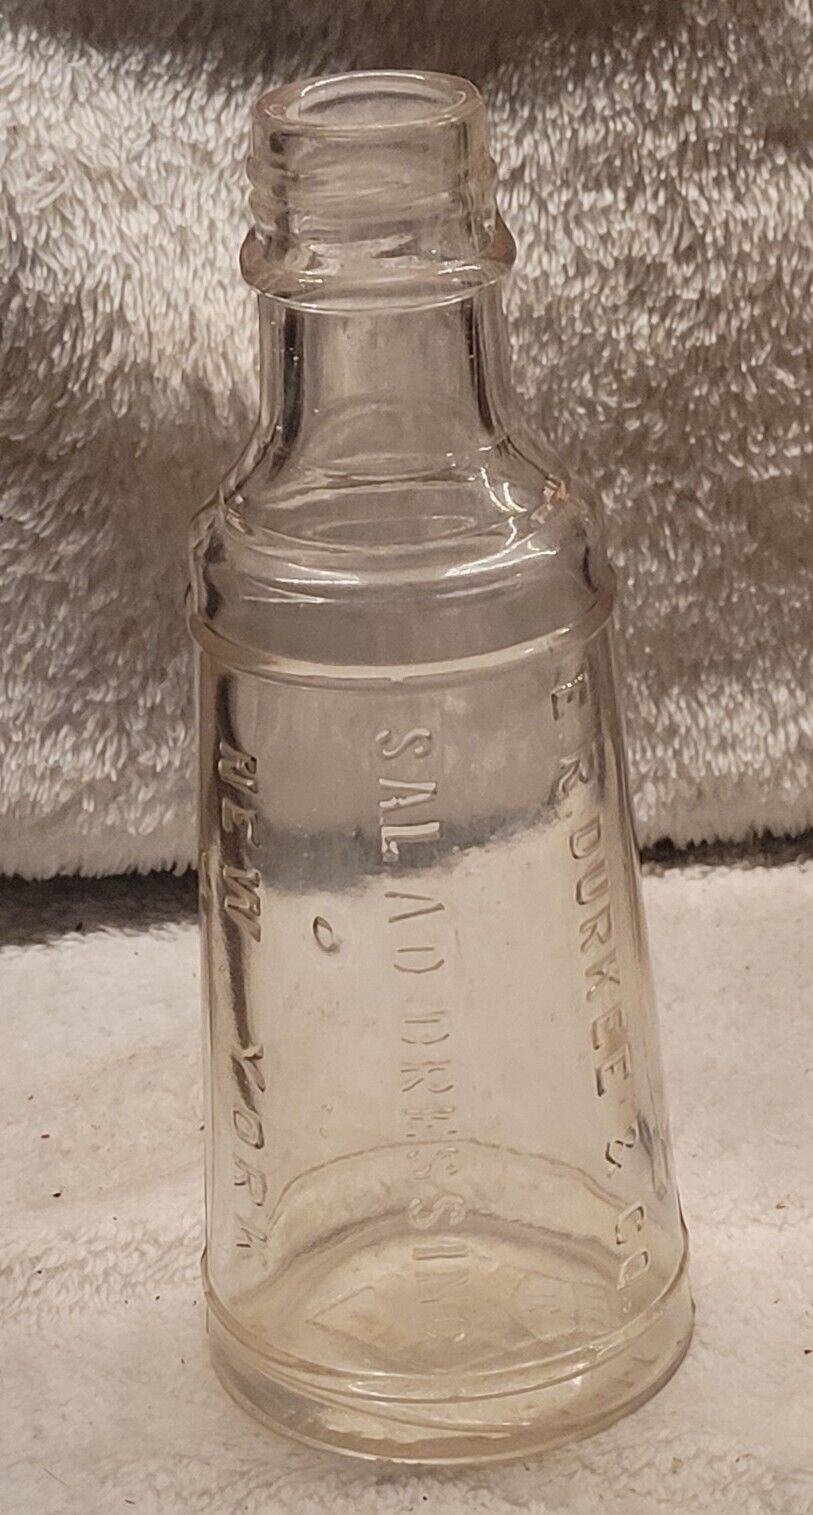 E.R. Durkee & Co. New York, Salad Dressing Clear to Amethyst Glass Bottle 